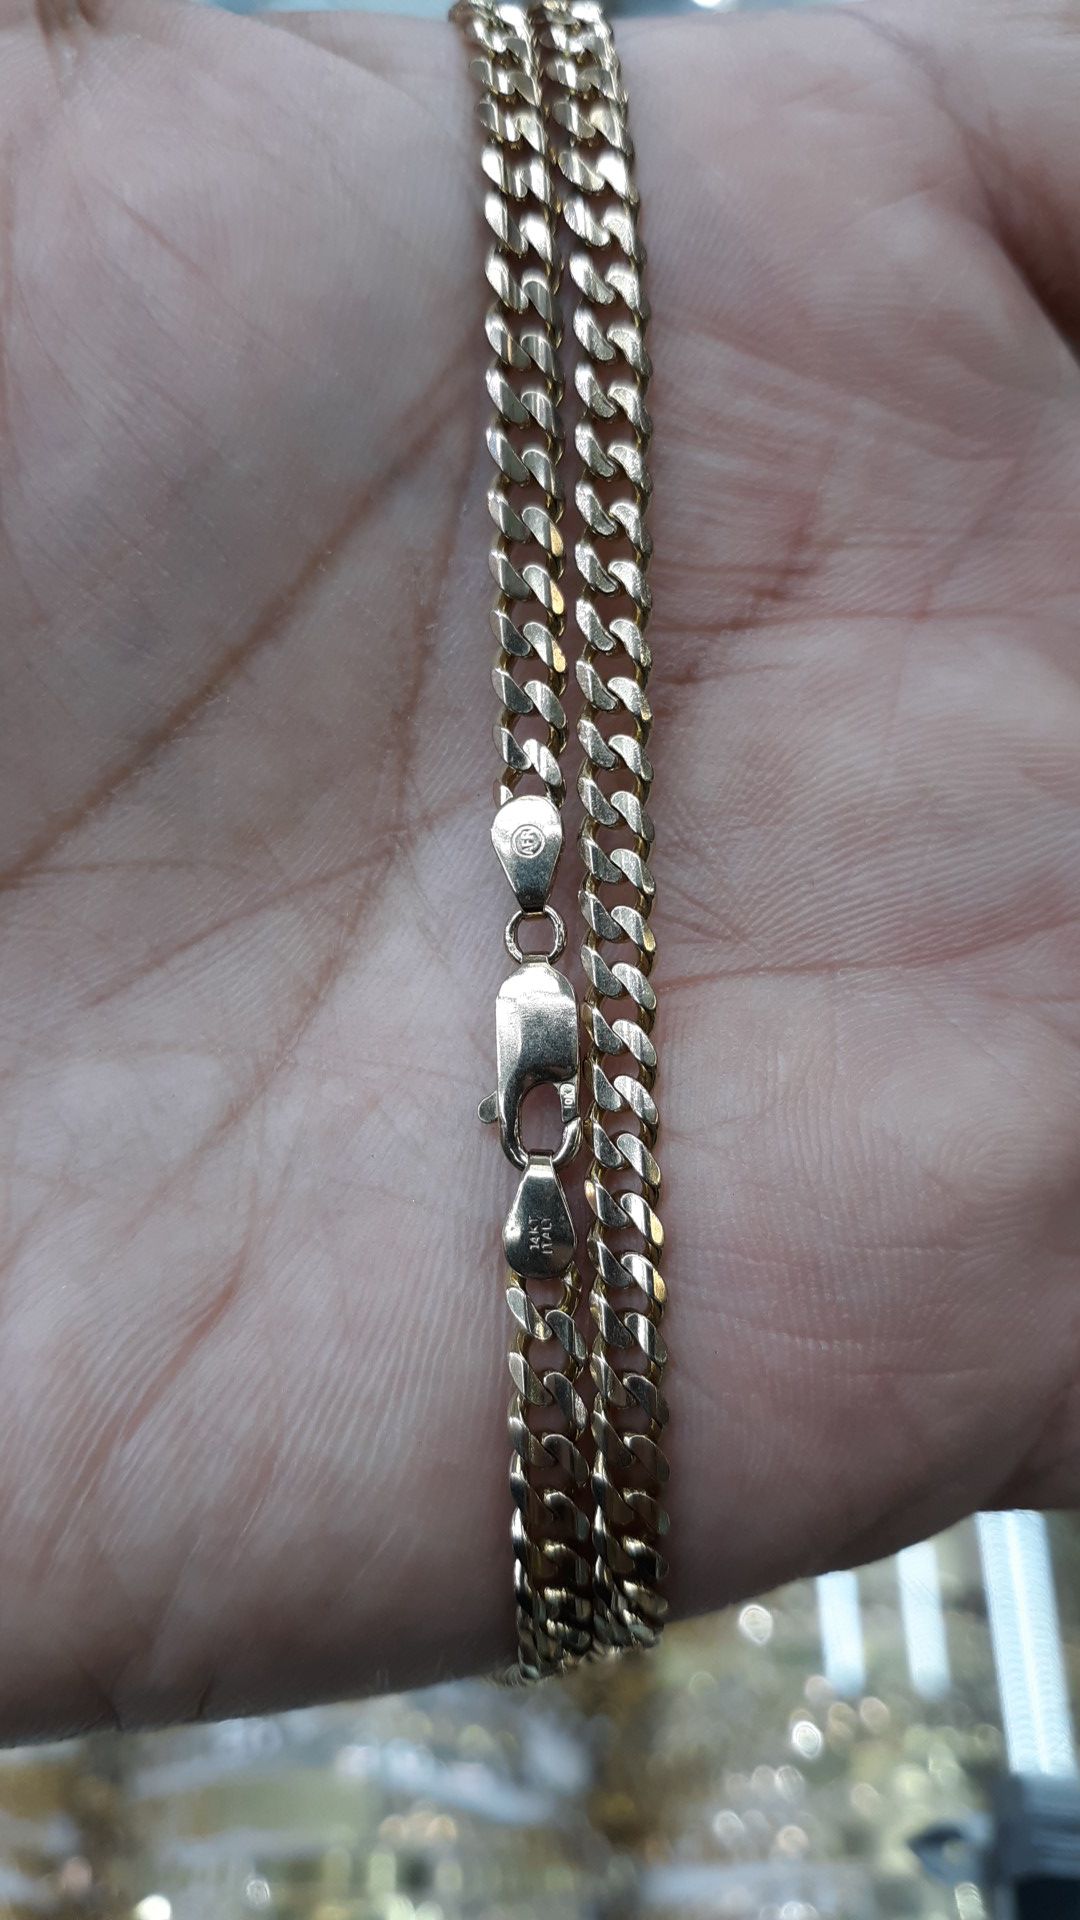 14k gold Cuban link chain hand made 22.7 grams solid 24 inch 4mm